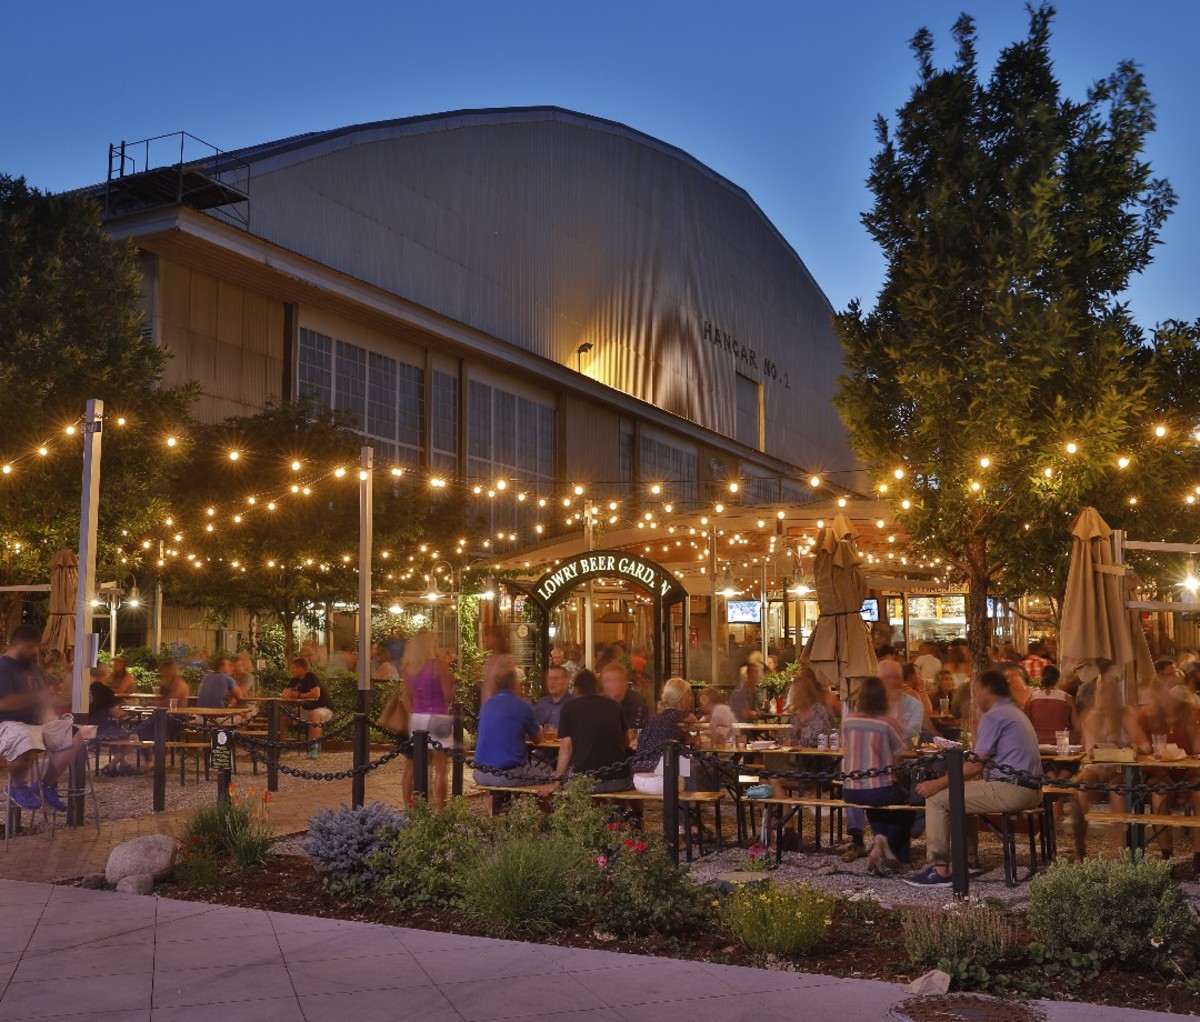 Housed in a revamped airplane hangar on a former Air Force base, the Oktoberfest-inspired Lowry Beer Garden is actually set in its very own park.